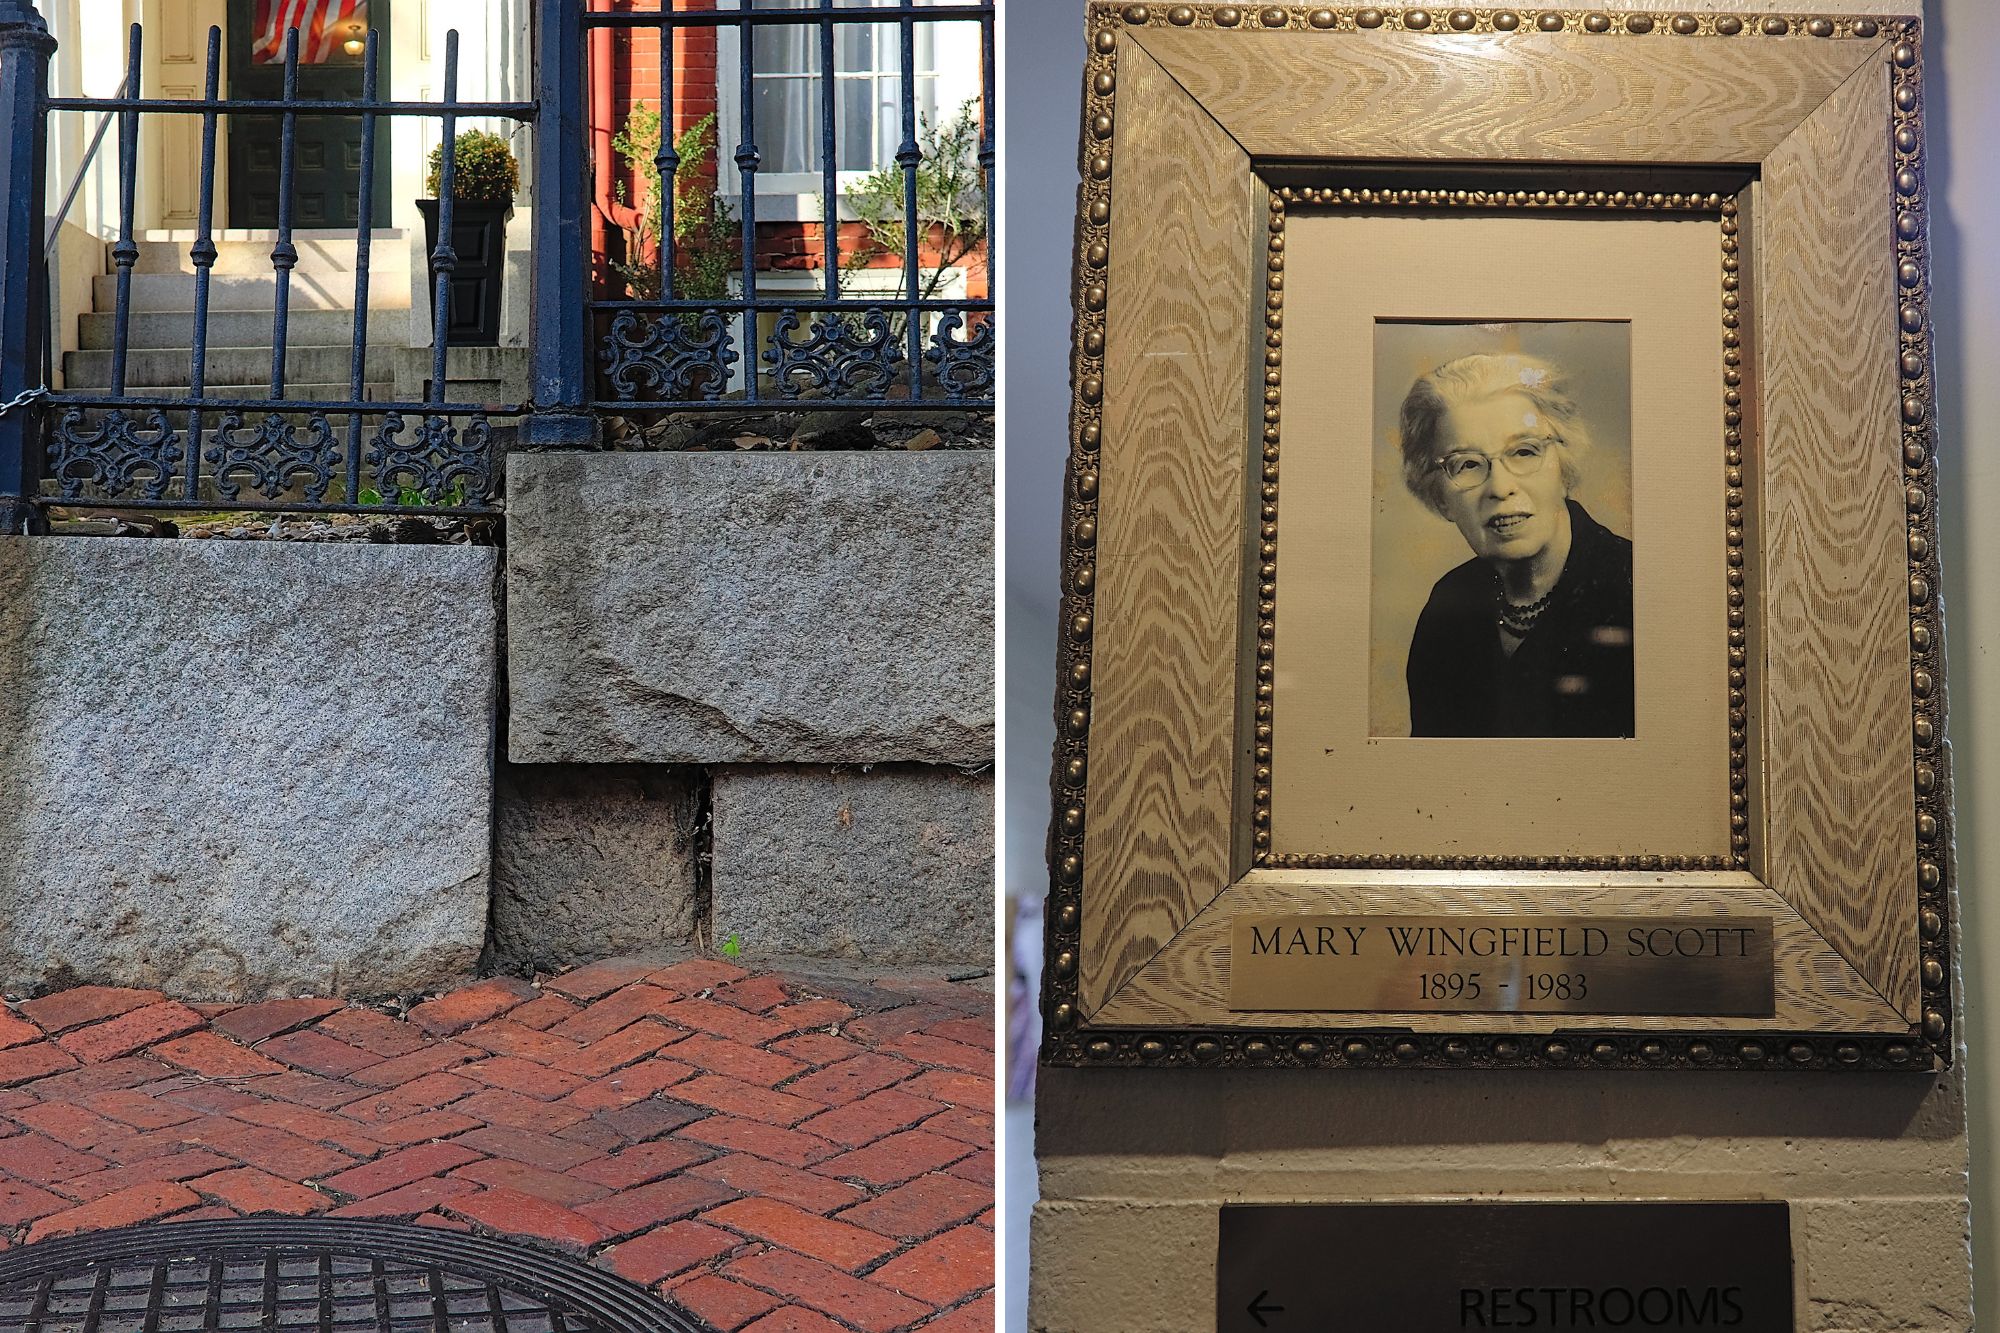 Two images taken at Linden Row Inn: the foundation marking where the original and newer buildings meet, and a photo of Mary Wingman Scott